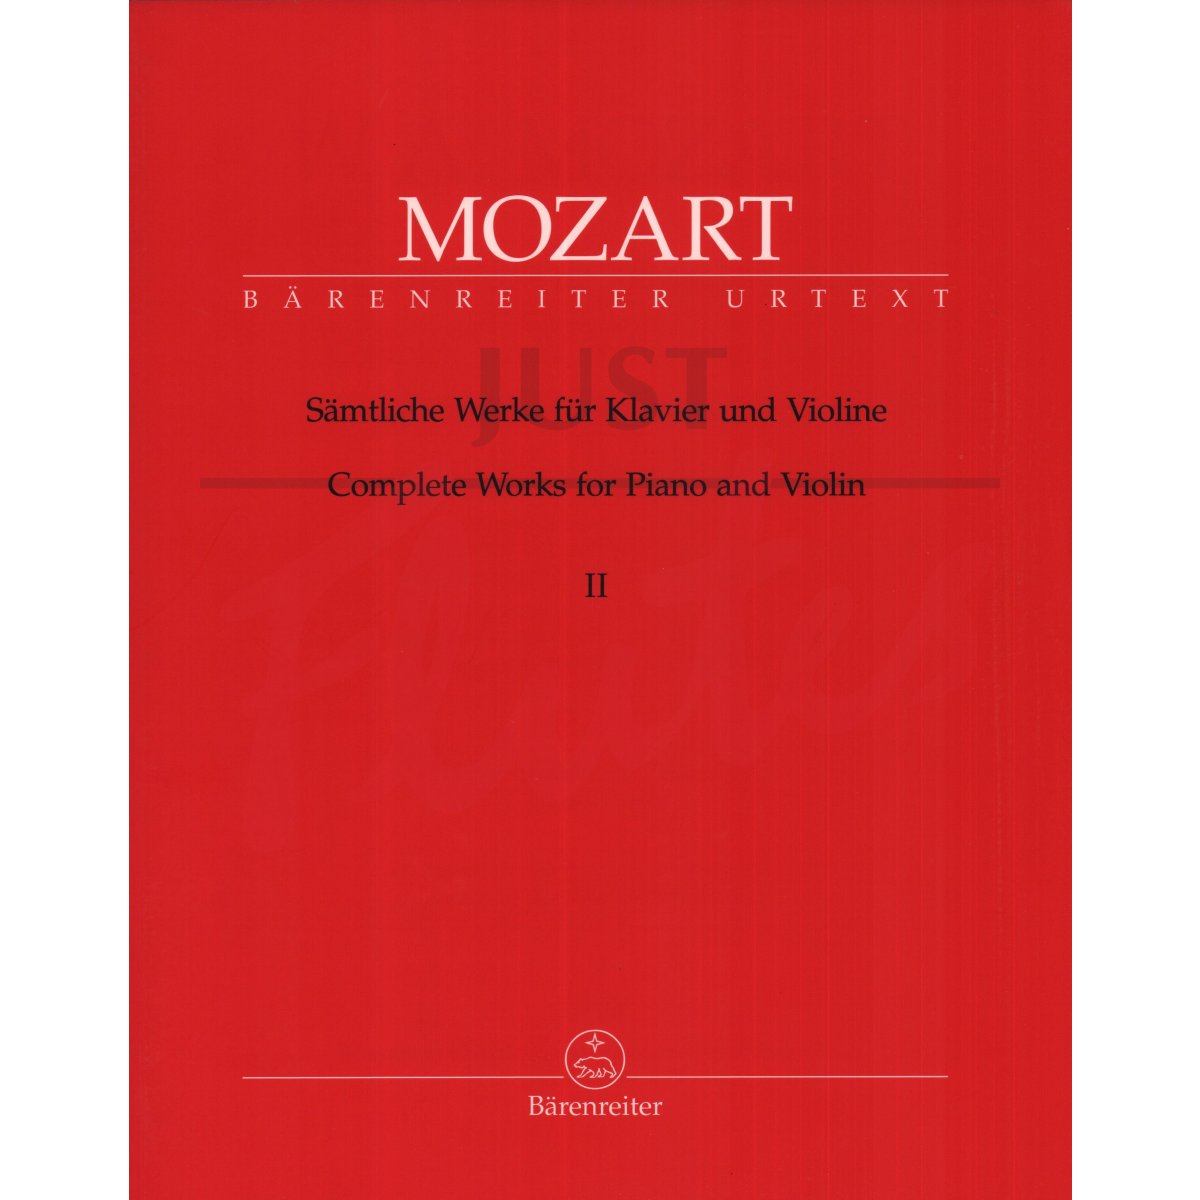 Complete Works for Violin and Piano Vol 2